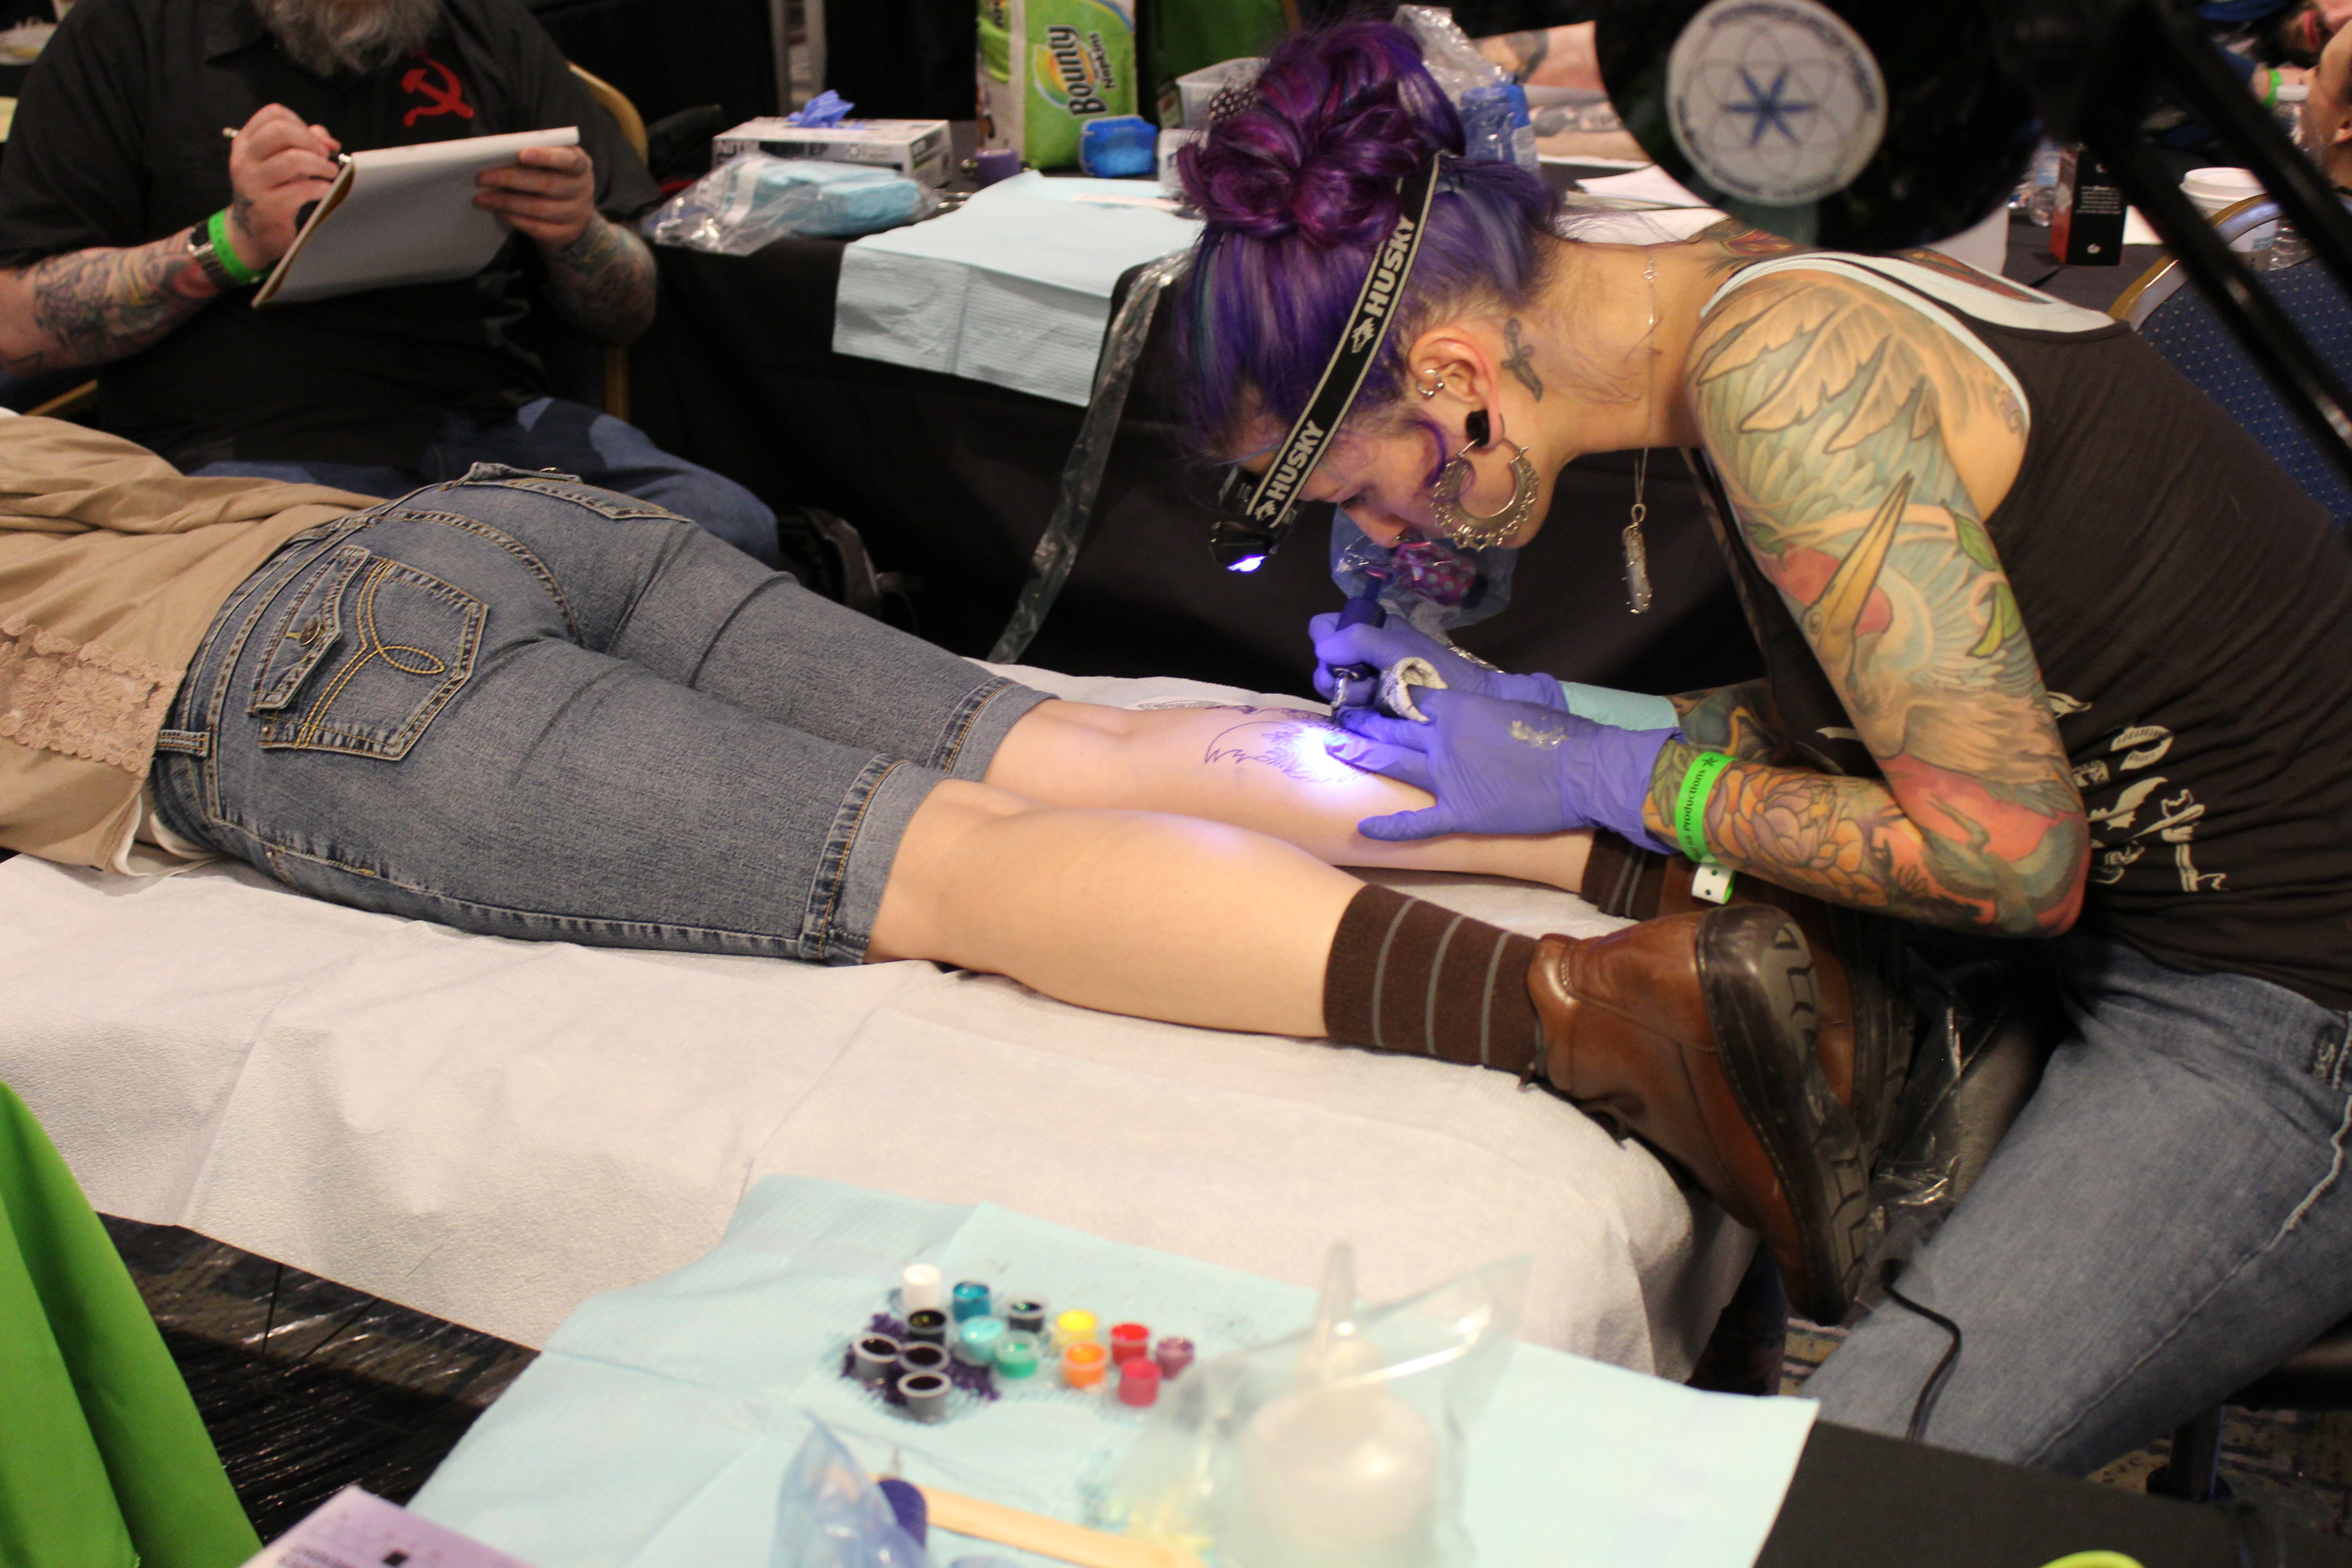 A tattoo artist works on a tattoo on the back of someone's calf area.